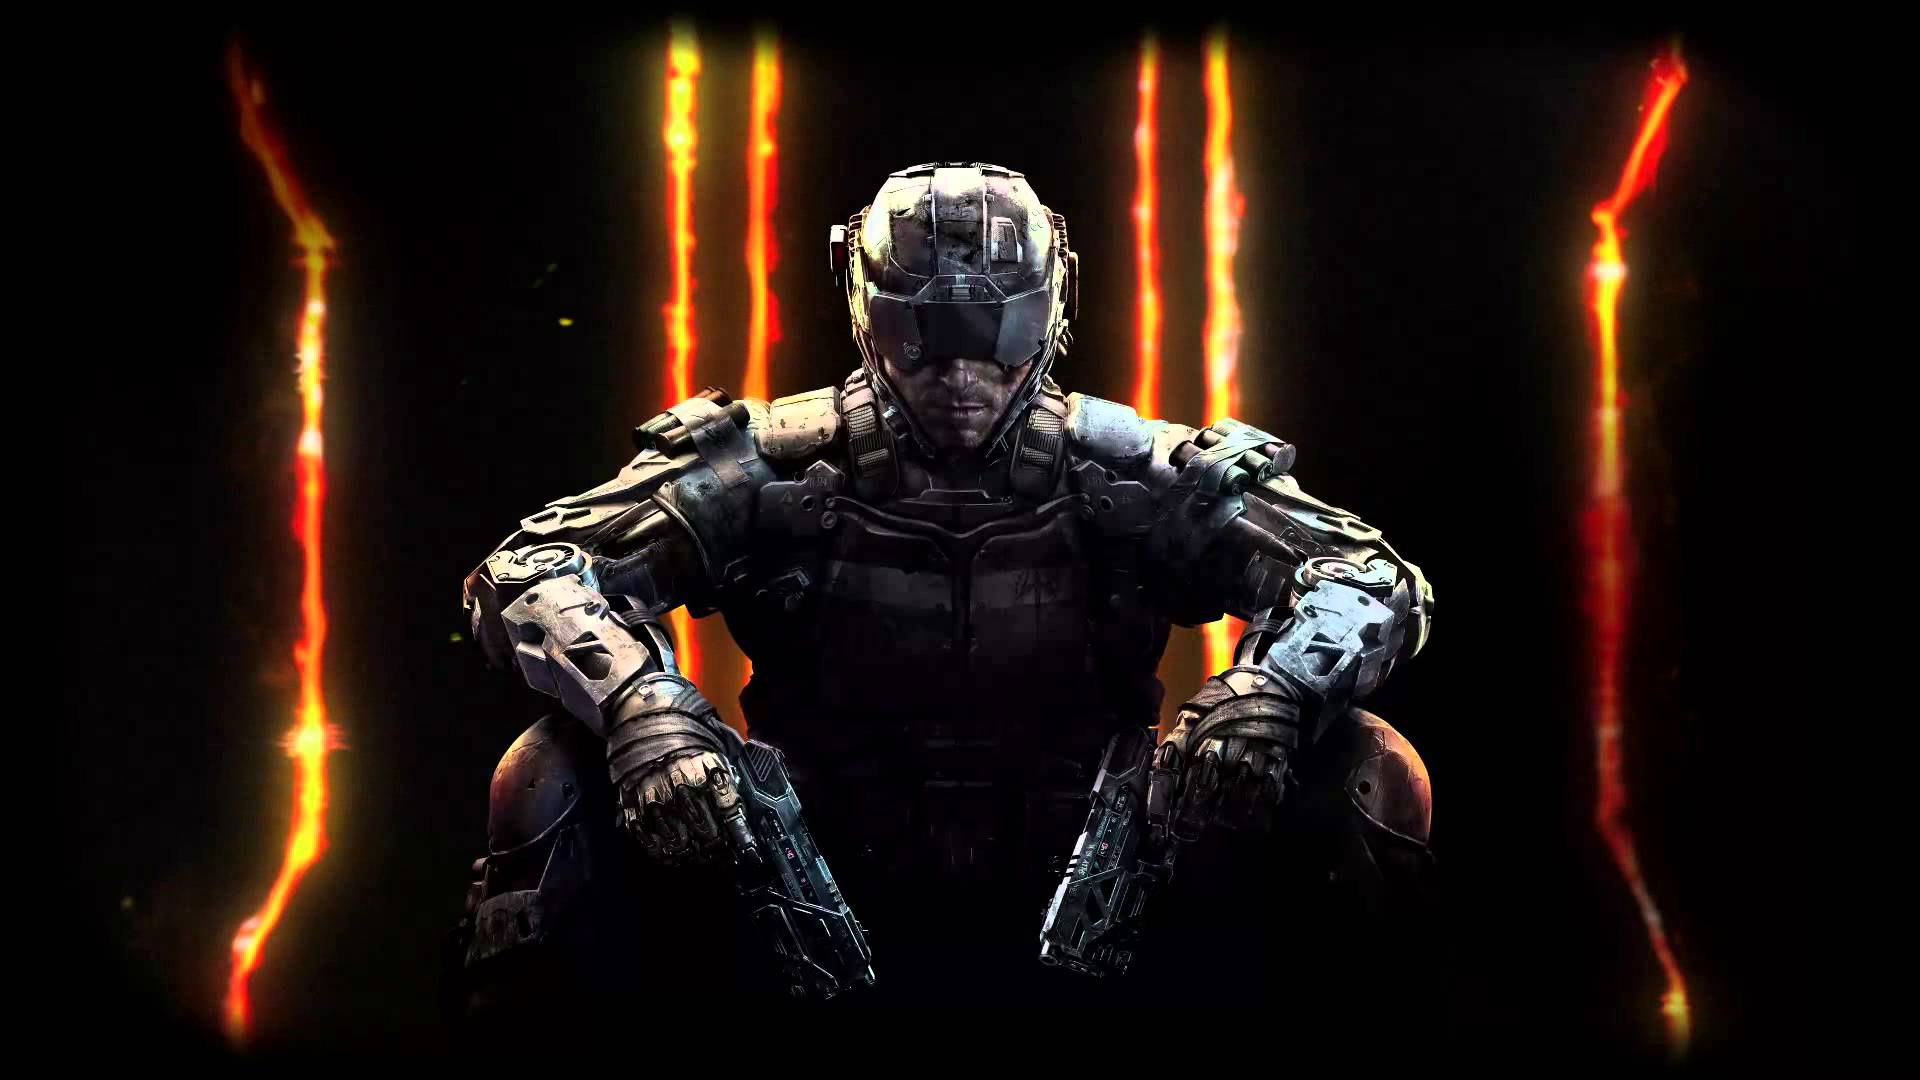 Call of Duty: Black Ops 3 Live Wallpaper - YouTube